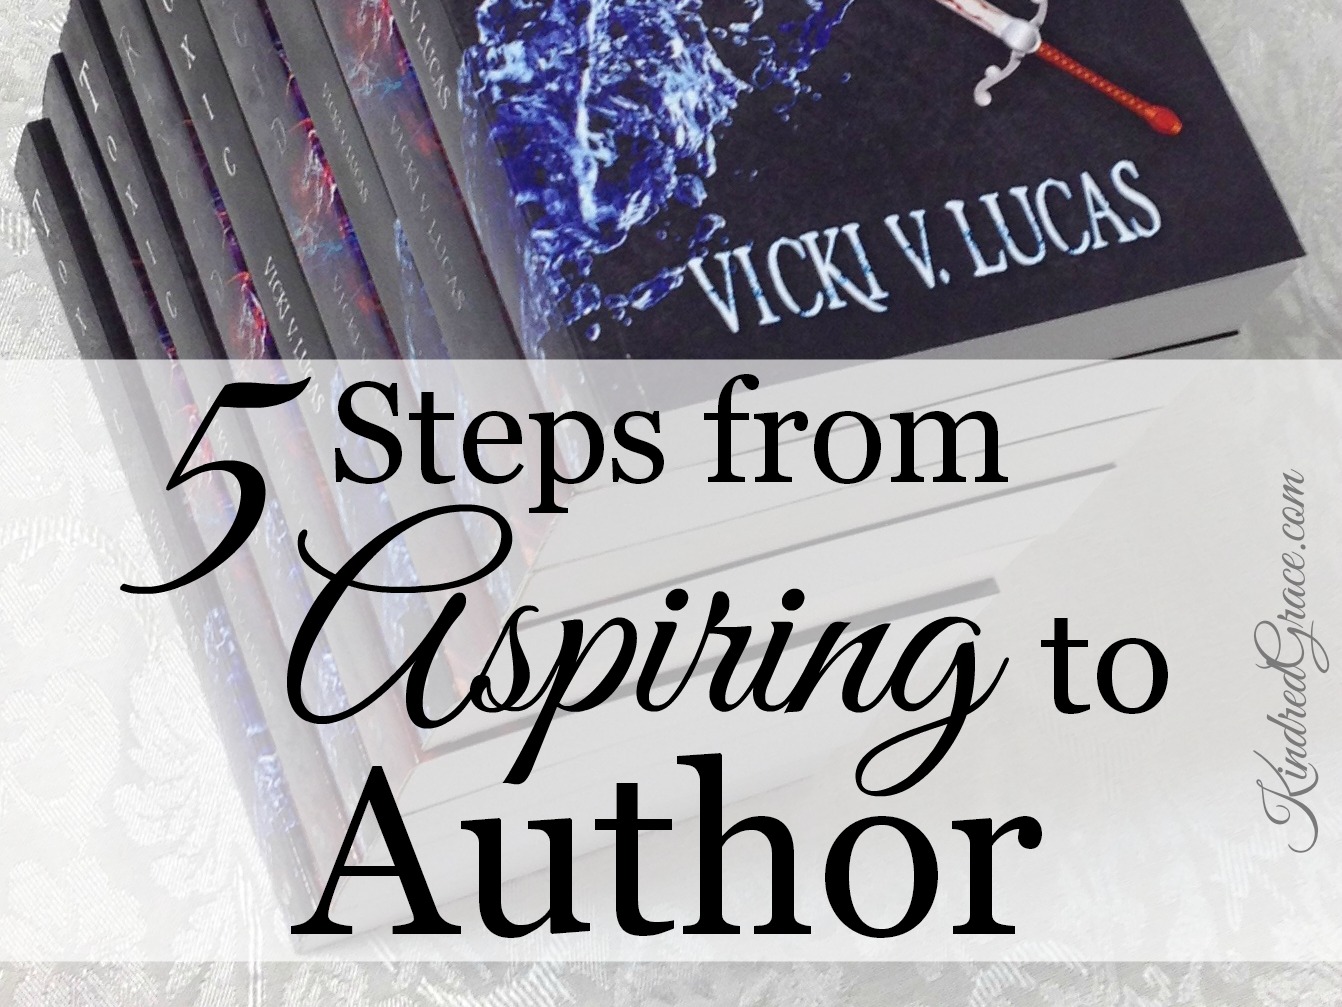 5 Steps from Aspiring to Author